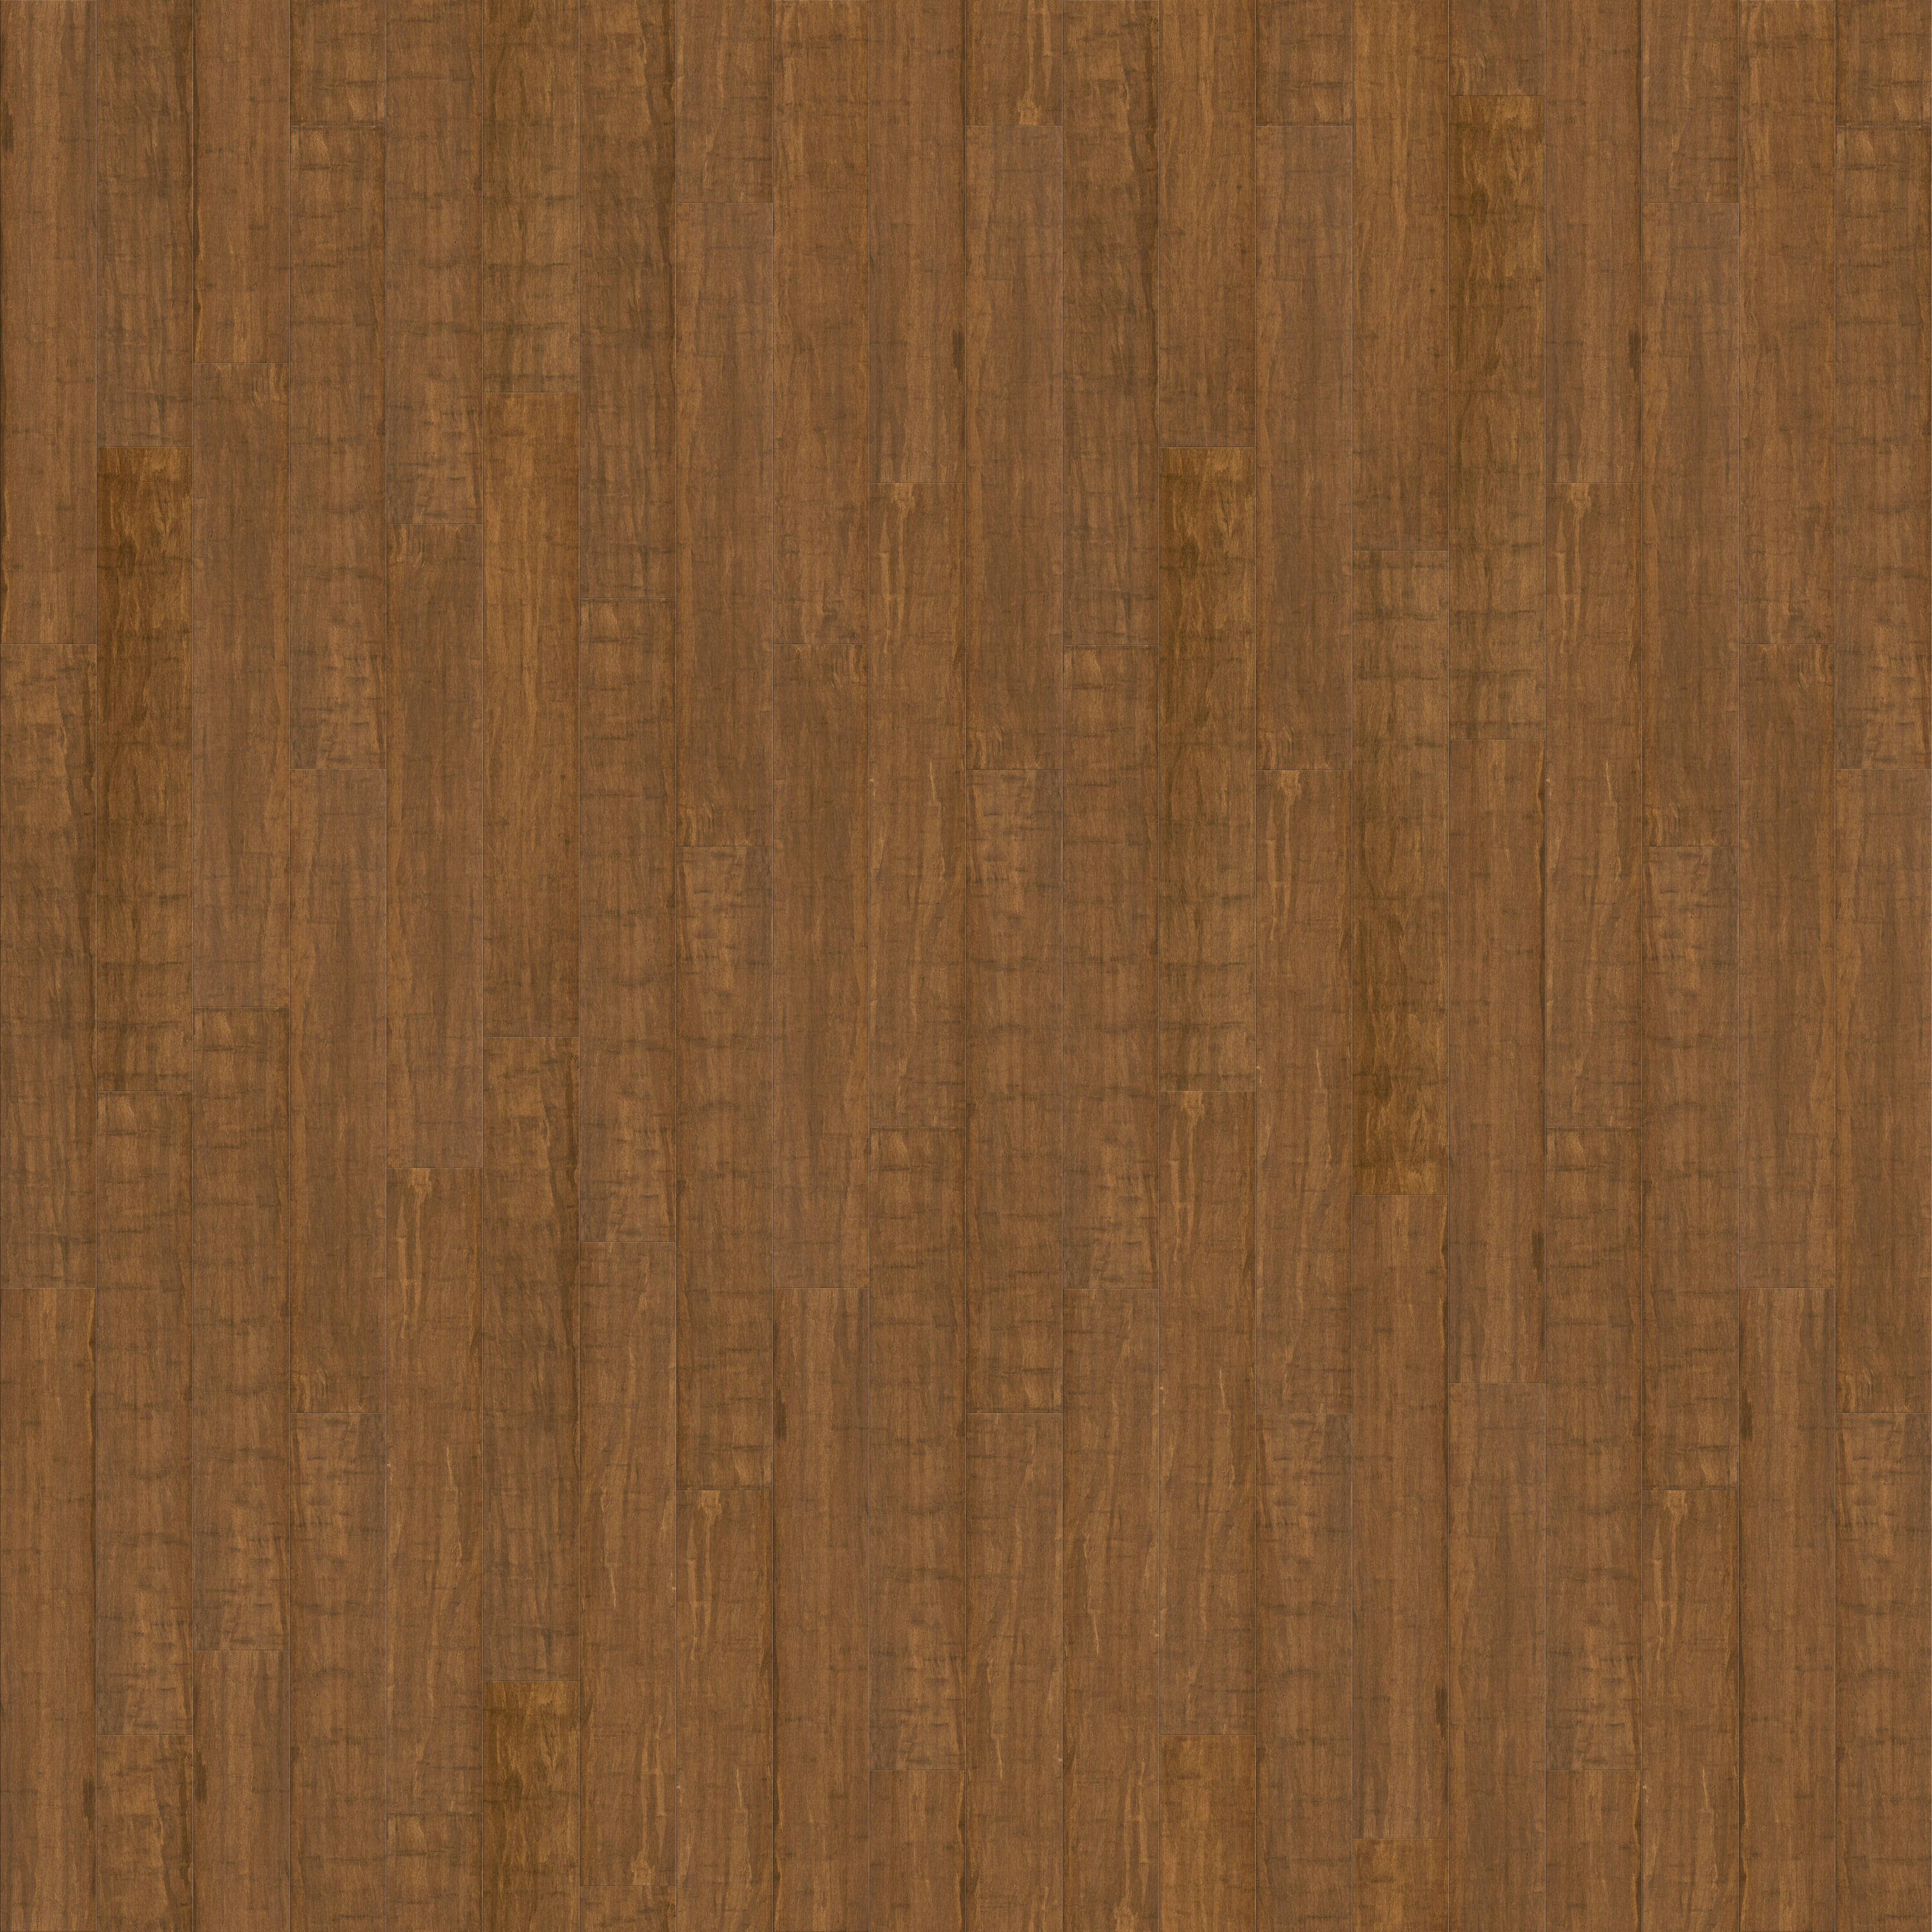 Fossilized Java Bamboo 5-1/8-in W x 9/16-in T x Smooth/Traditional Solid Hardwood Flooring (25.88-sq ft) in Brown | - CALI 7004001900